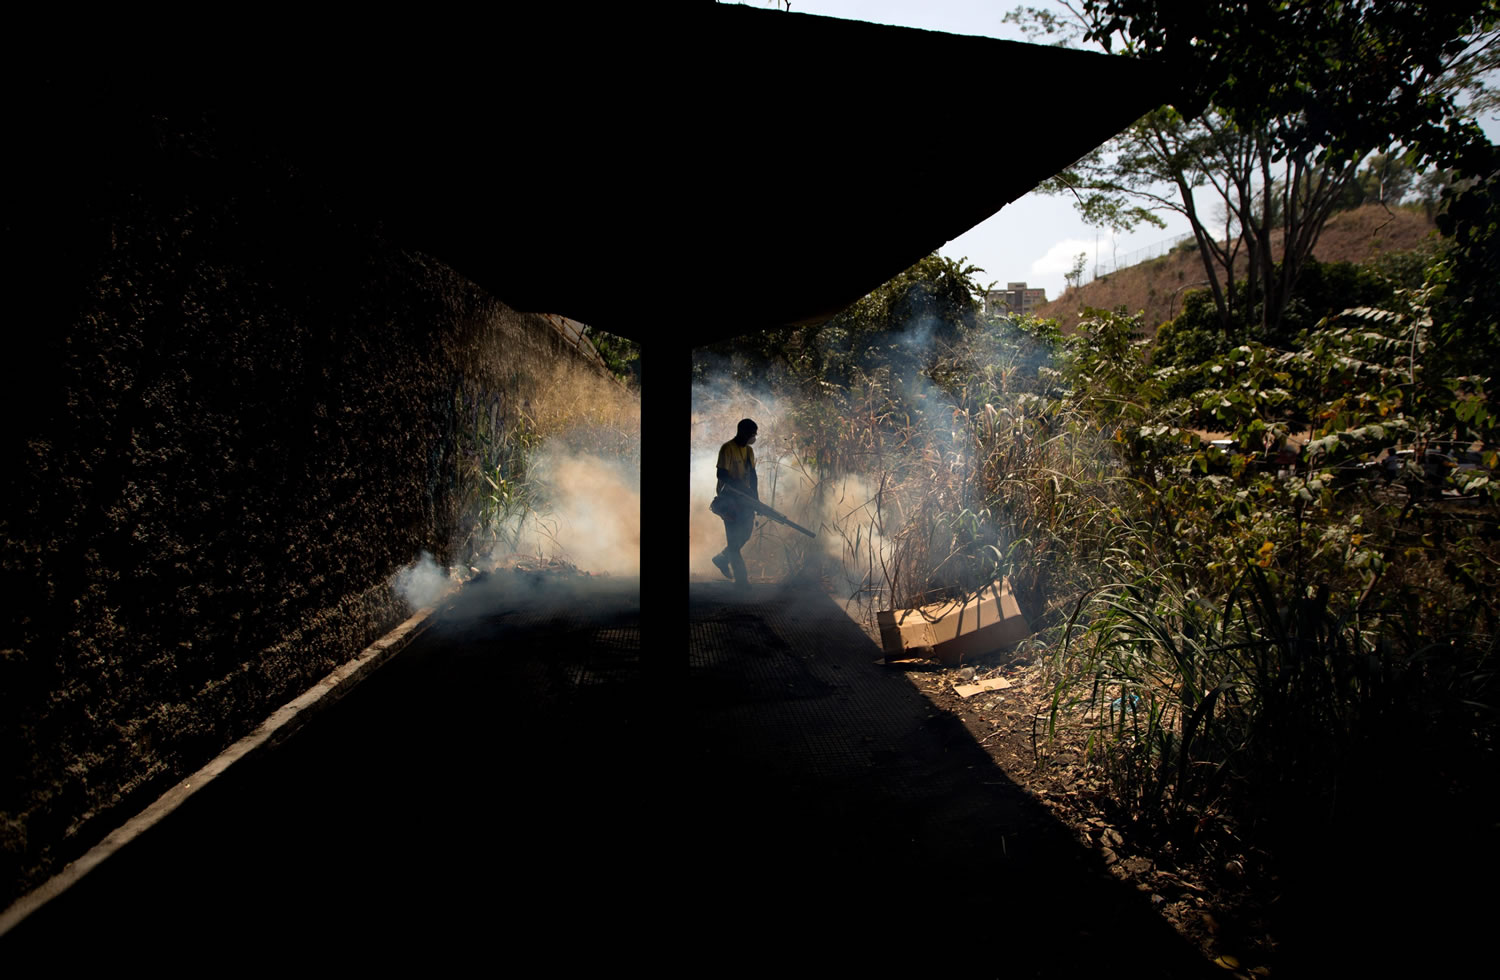 A municipal worker fumigates against the Aedes aegypti mosquito that transmits the Zika virus, in the Petare neighborhood of Caracas, Venezuela.